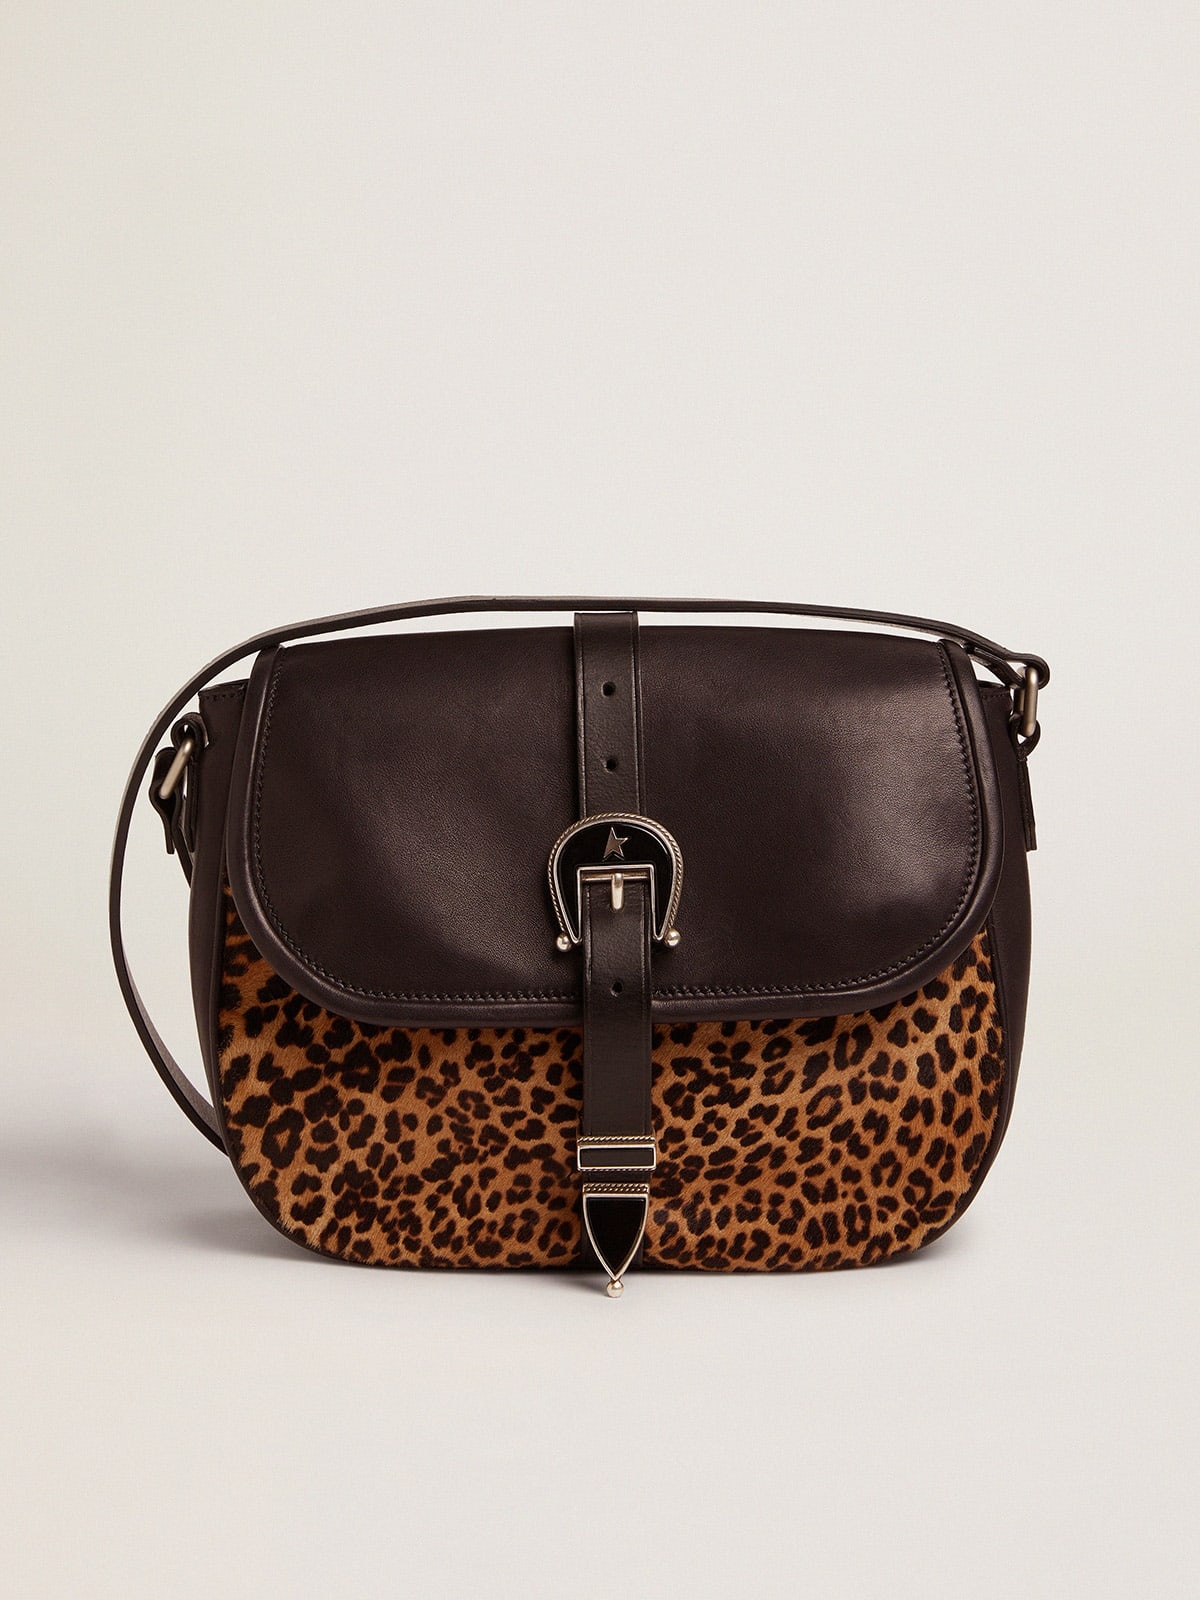 Medium Rodeo Bag in black leather and leopard-print pony skin - 1